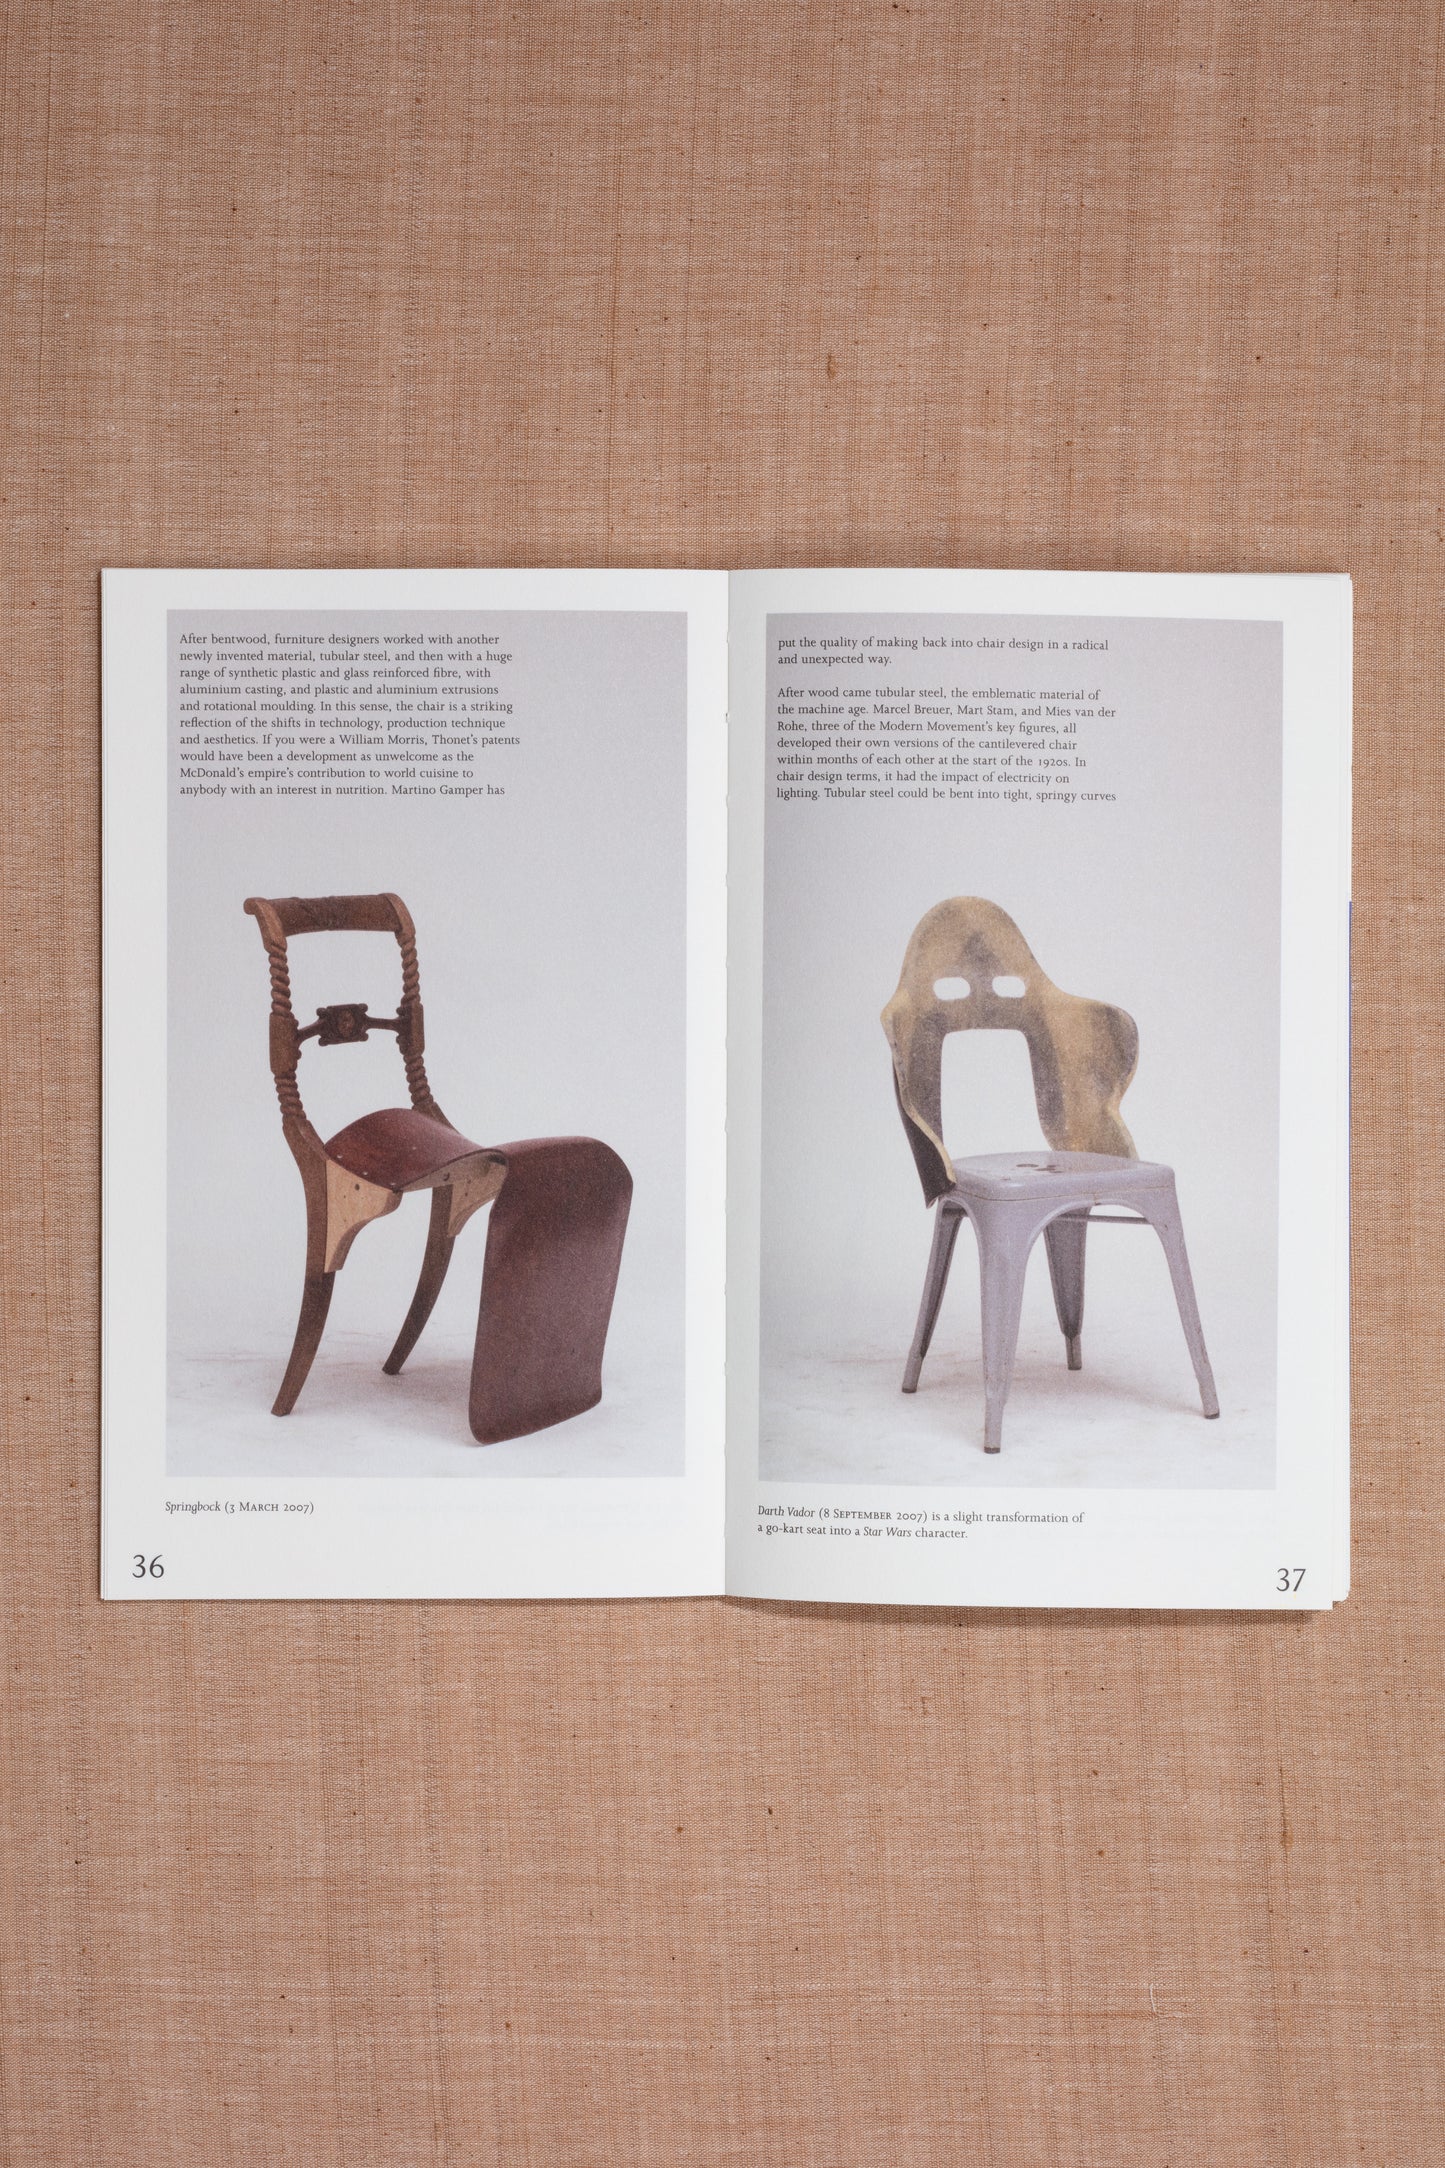 100 Chairs in 100 Days and its 100 Ways. (5th Edition, 5th Size)